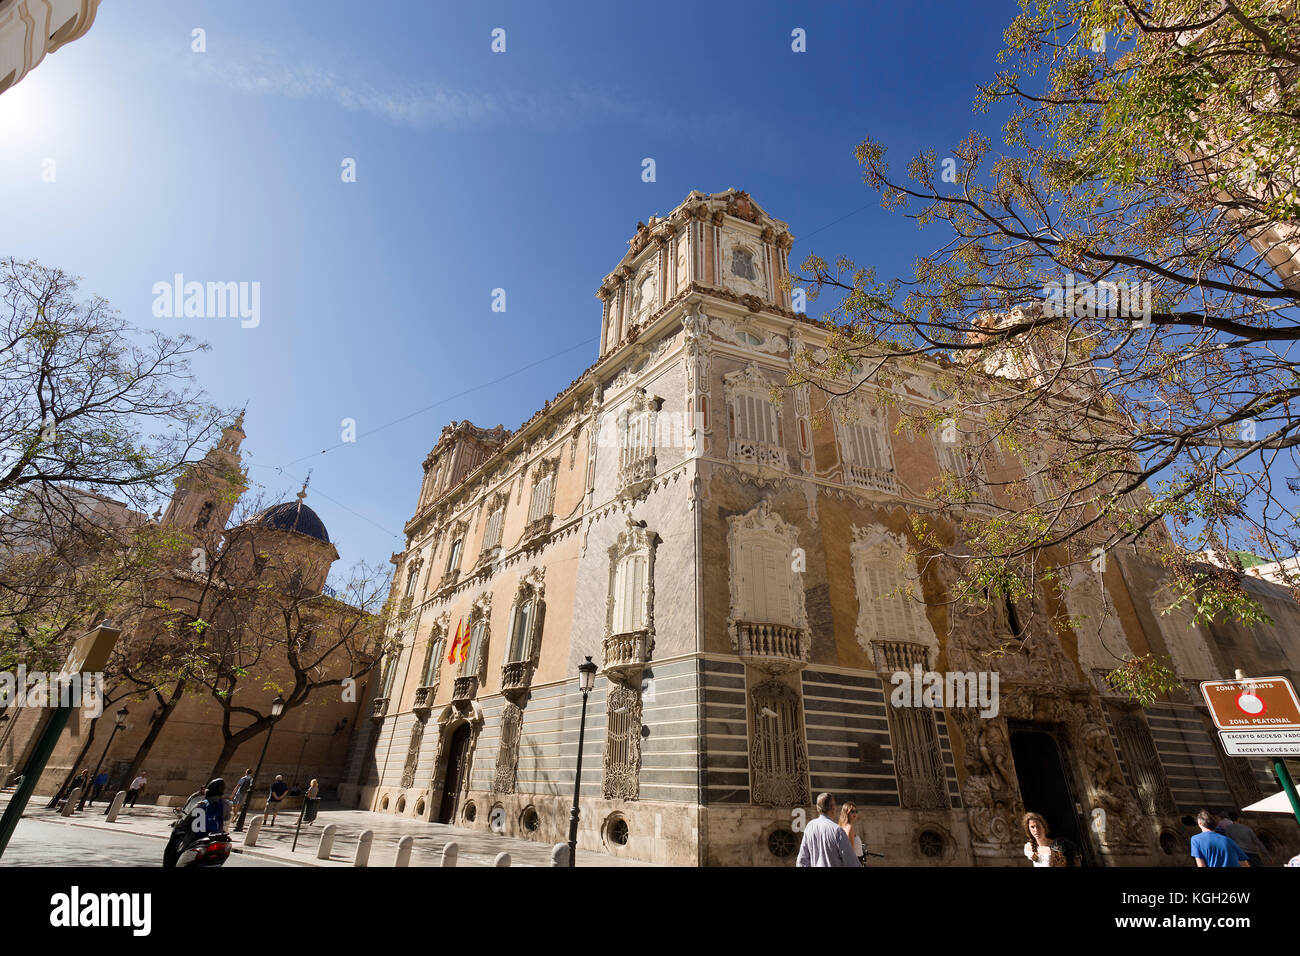 Valencia, Spain. October 25, 2017: The National Museum of Ceramics and Sumptuary Arts González Martí is located in the palace of the Marqués de Dos Ag Stock Photo